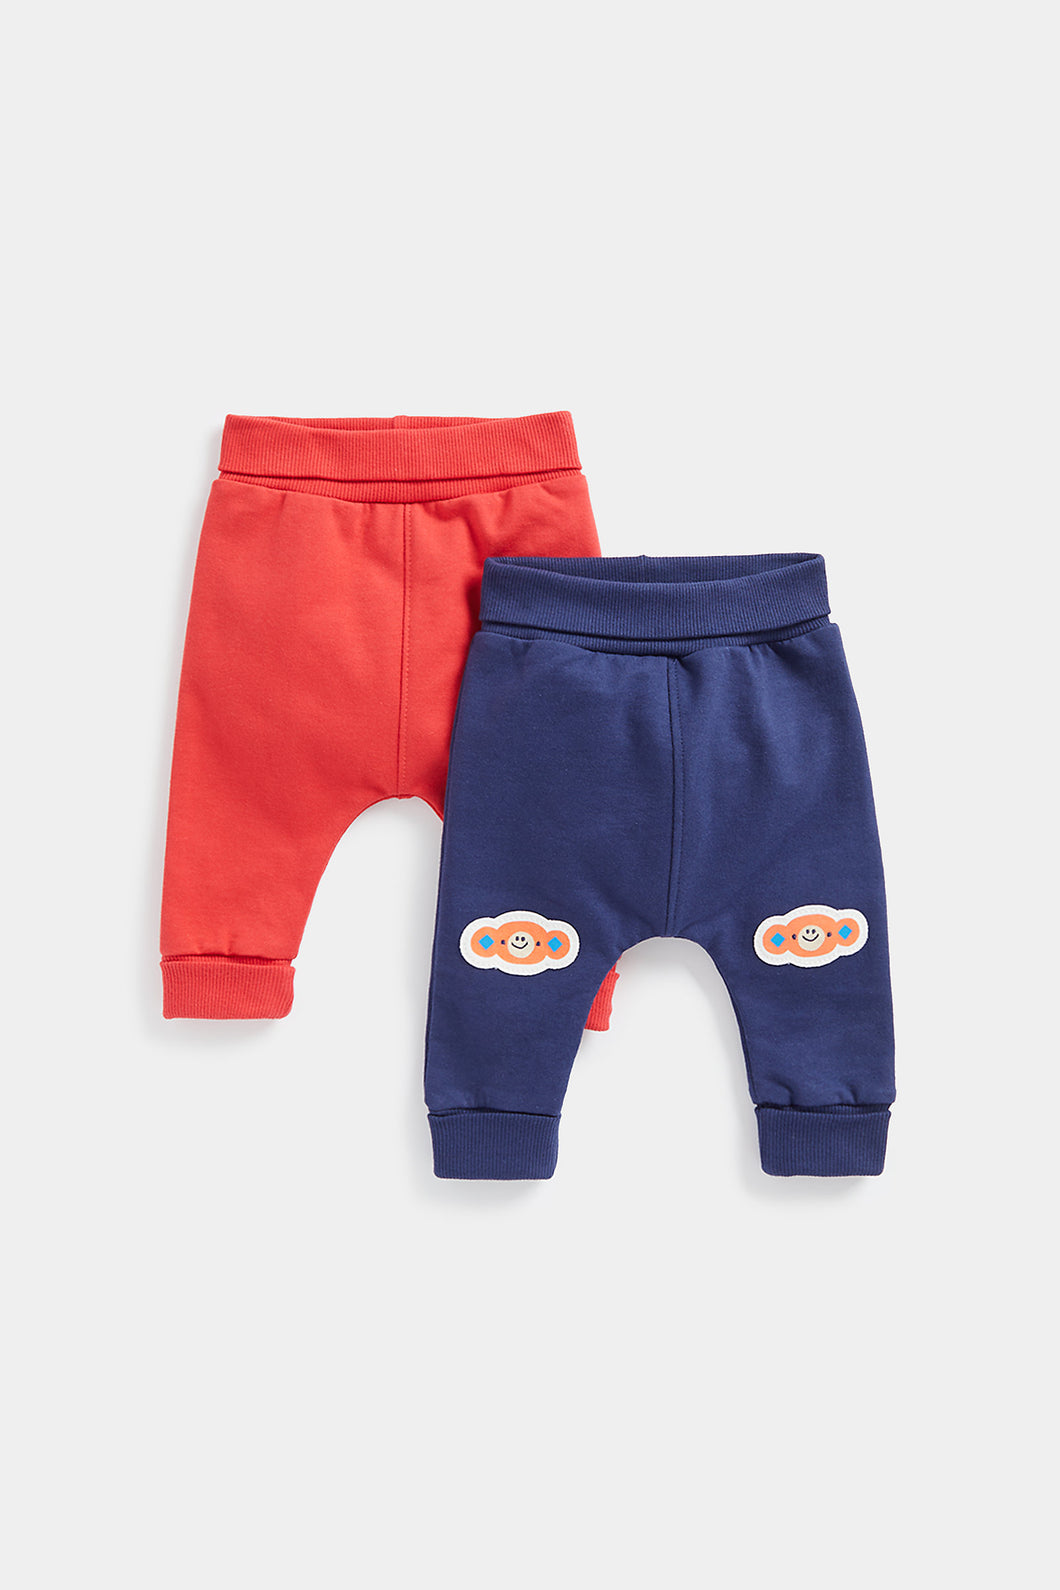 Mothercare Monkey Joggers - 2 Pack